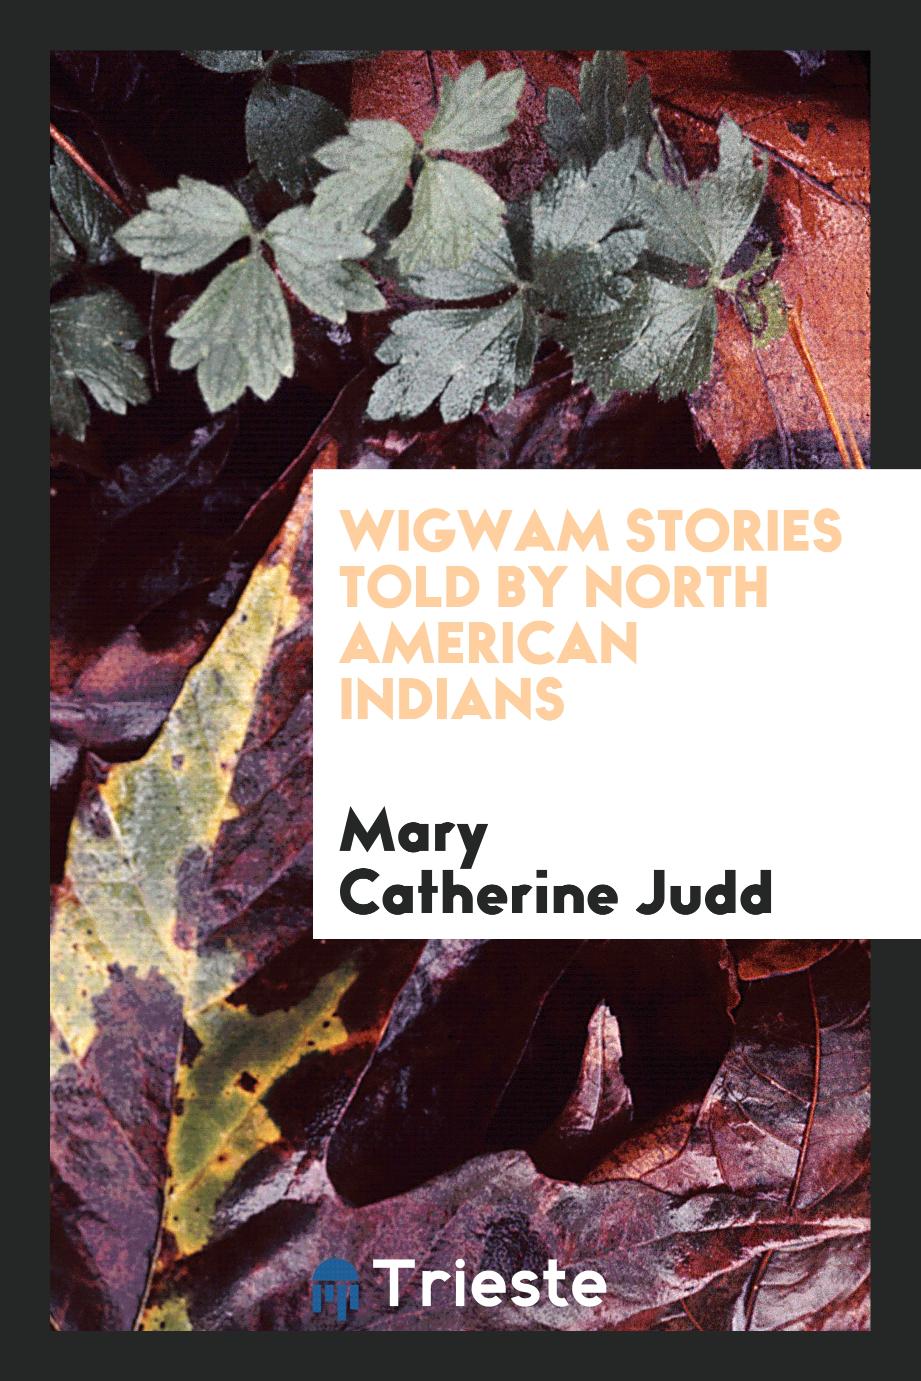 Wigwam Stories Told by North American Indians